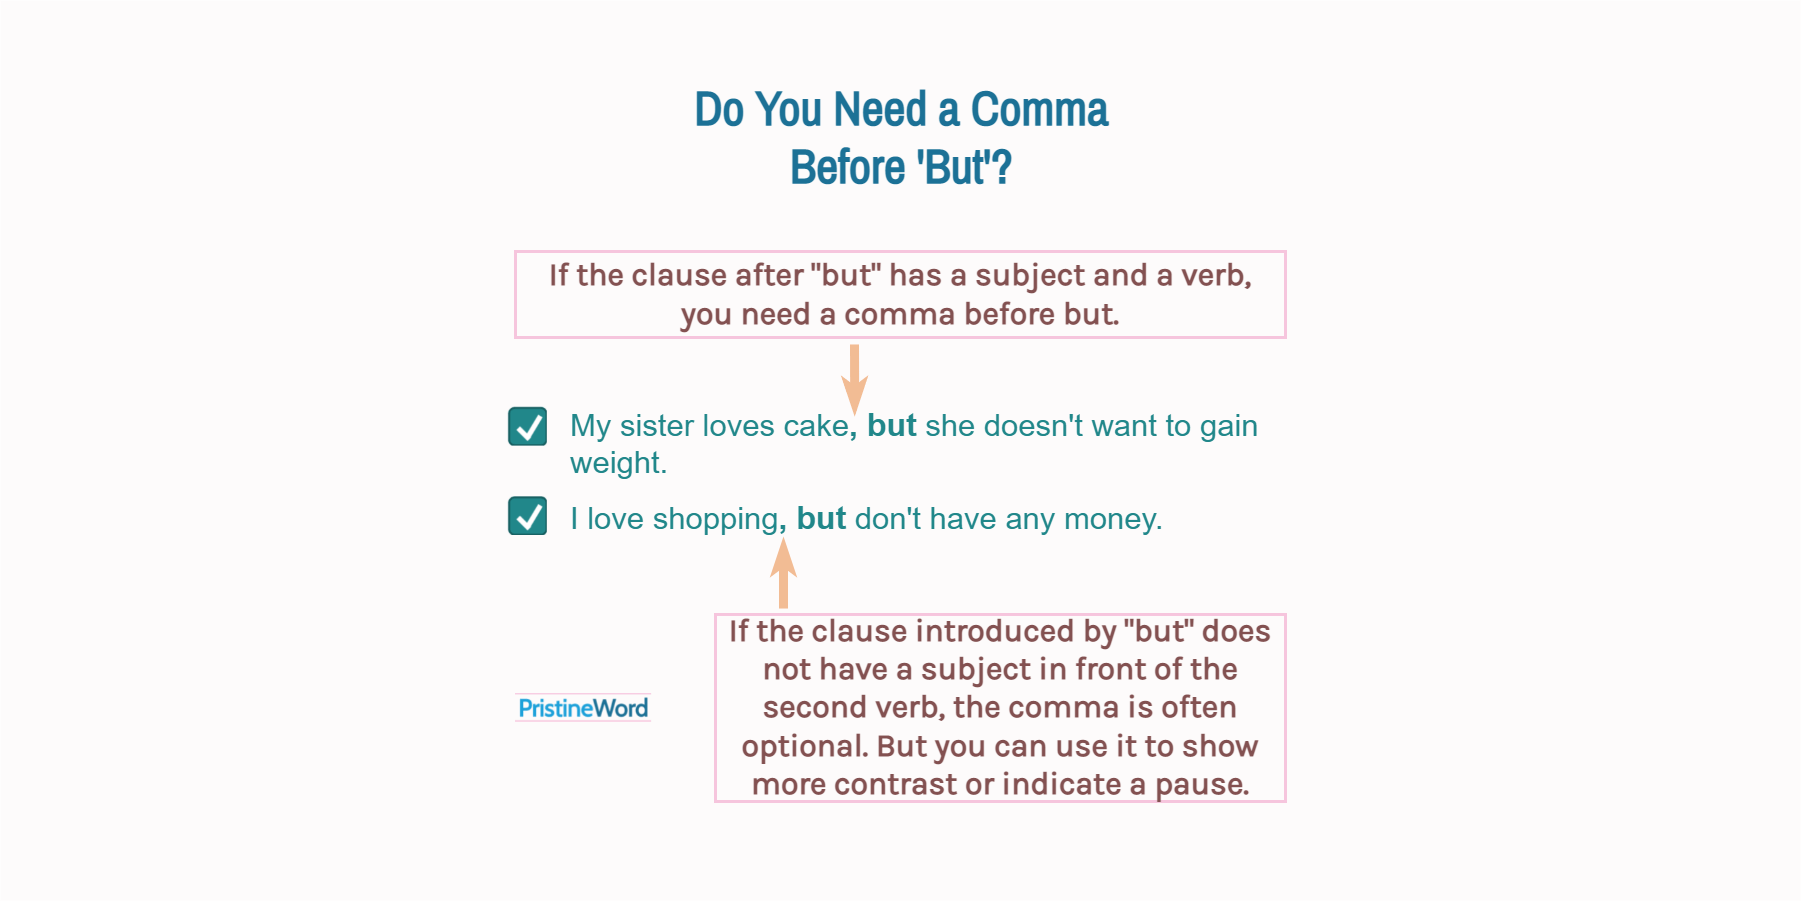 Do You Need a Comma Before 'But'?